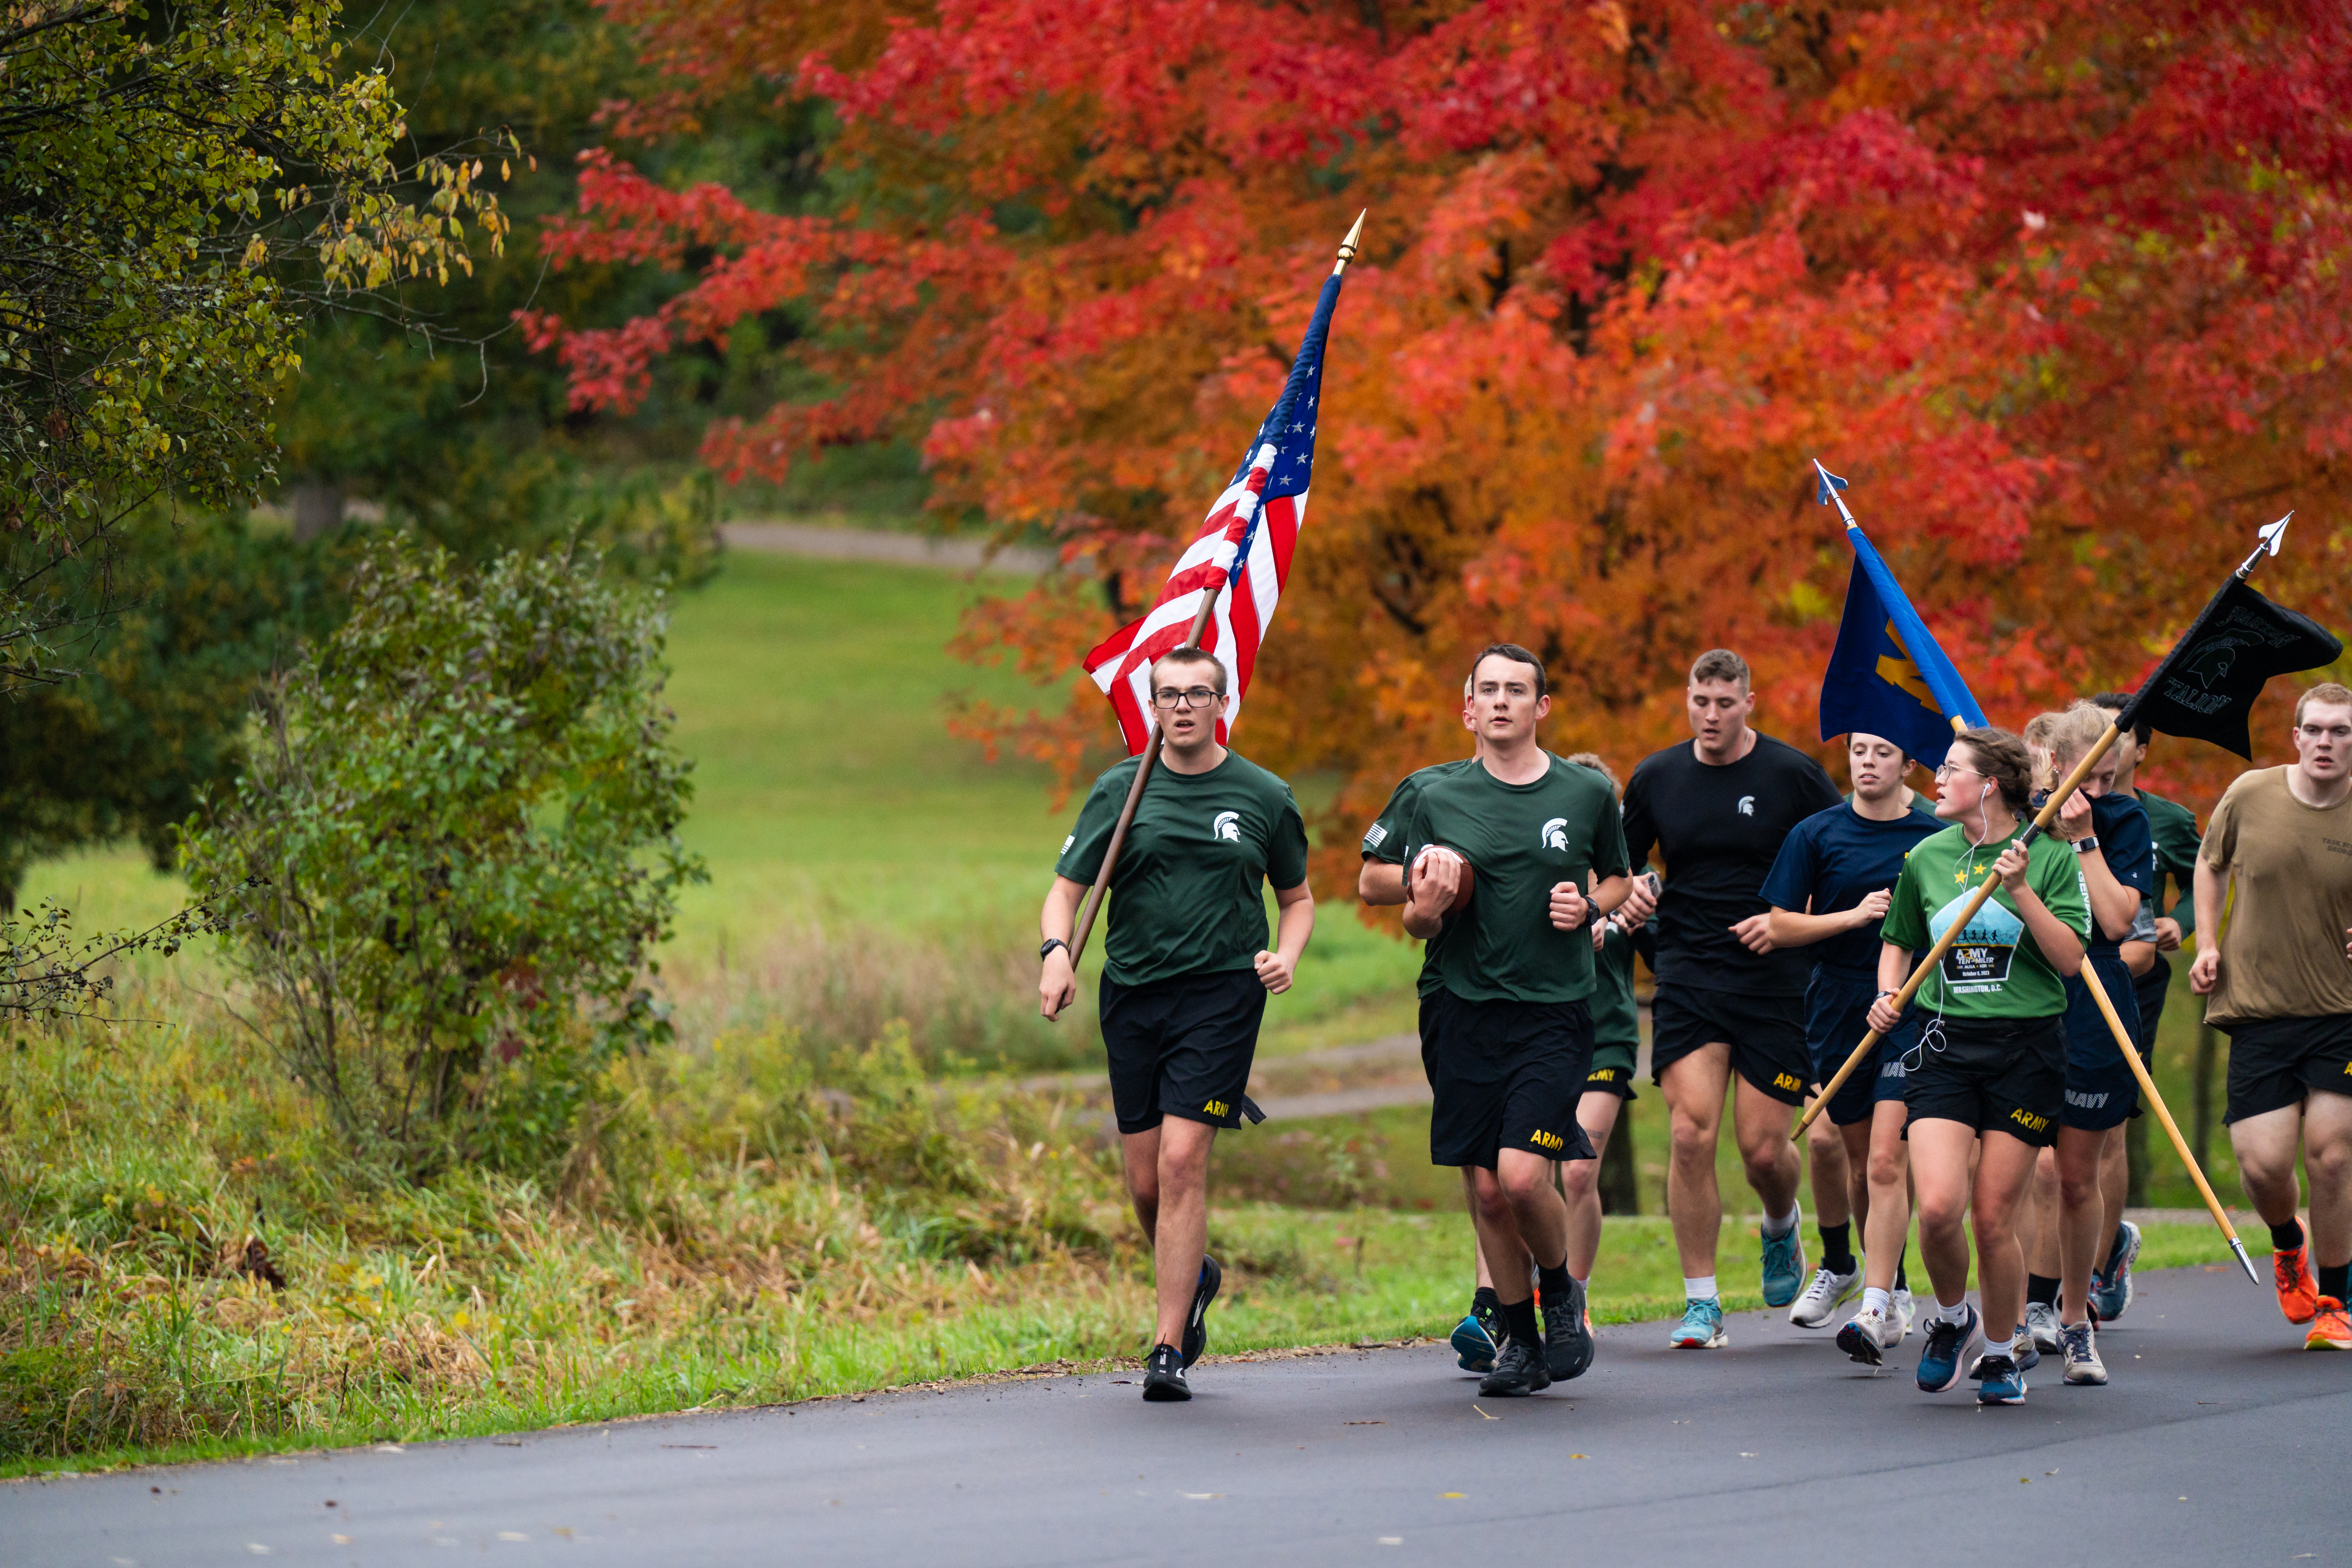 Army cadets running with US and Army flags with beautiful red/orange fall colors from the trees behind them